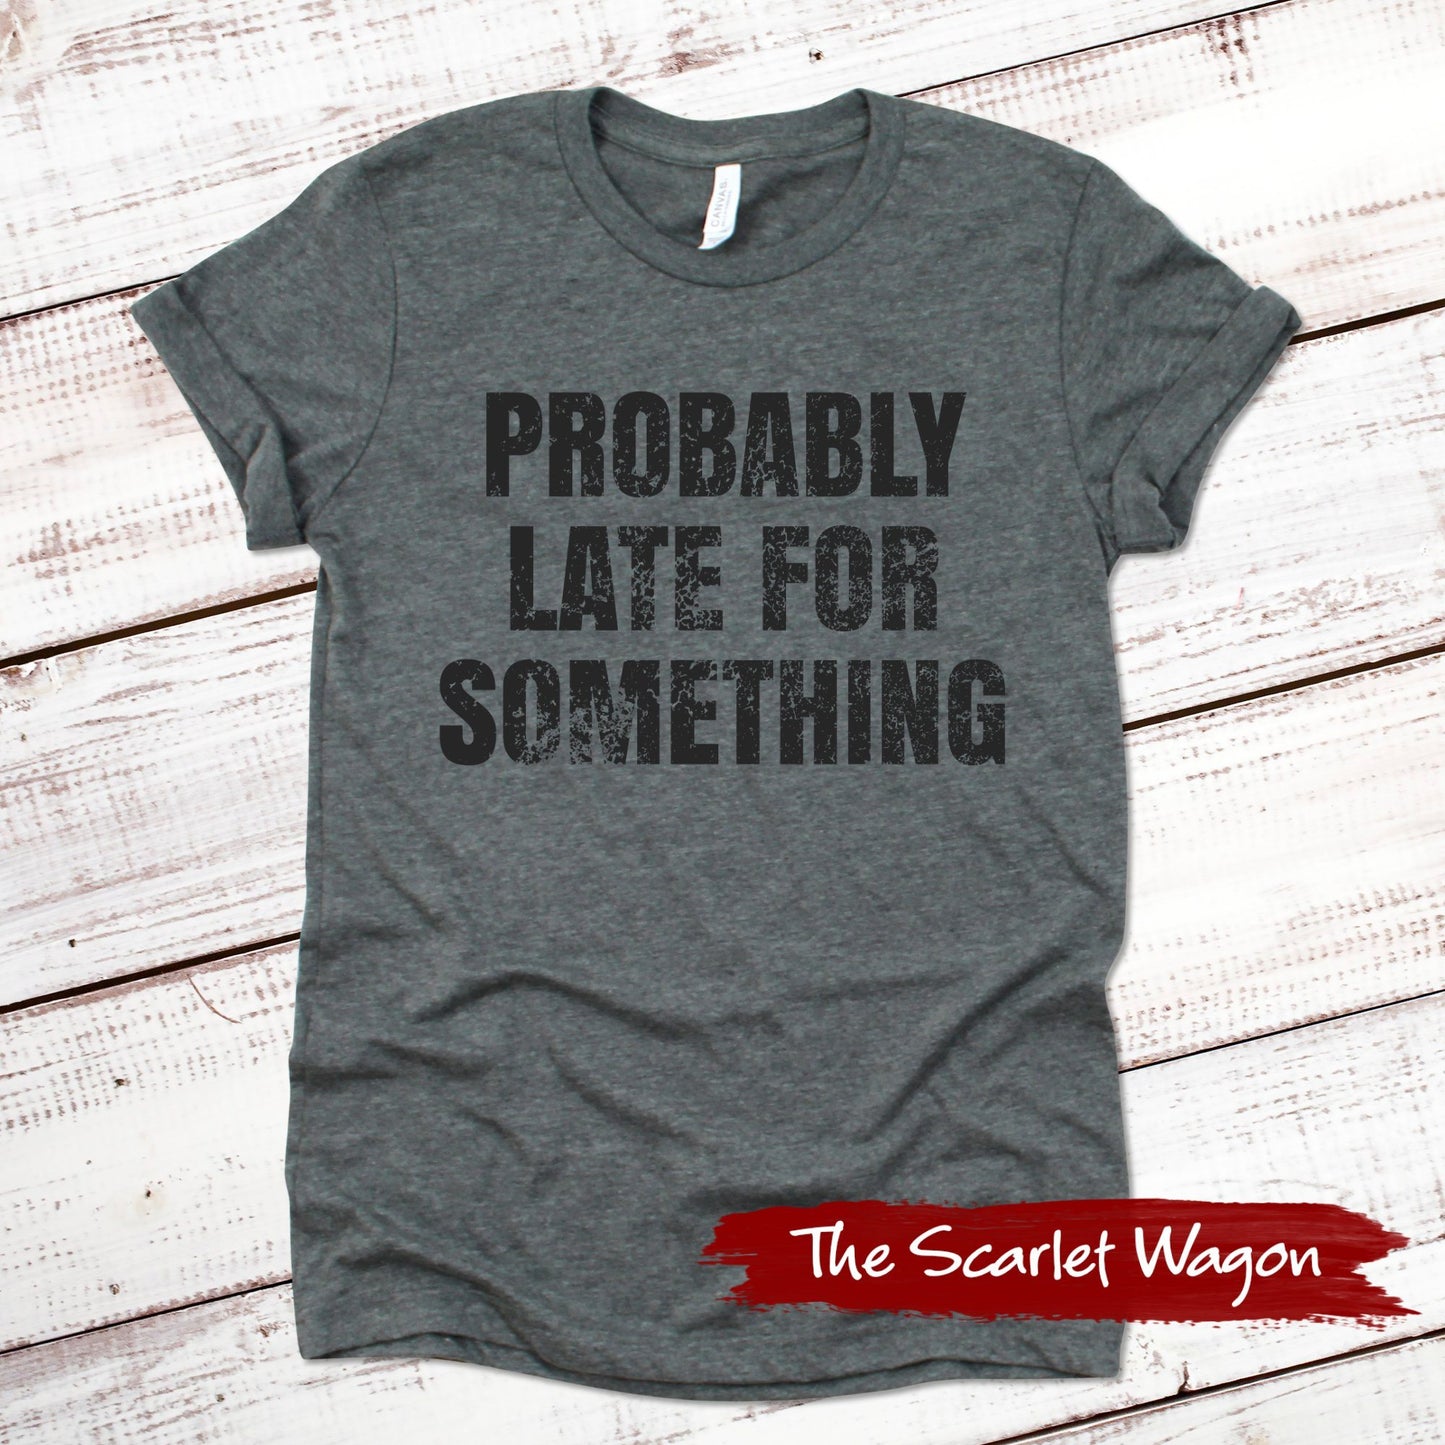 Probably Late for Something Funny Shirt Scarlet Wagon Deep Heather Gray XS 